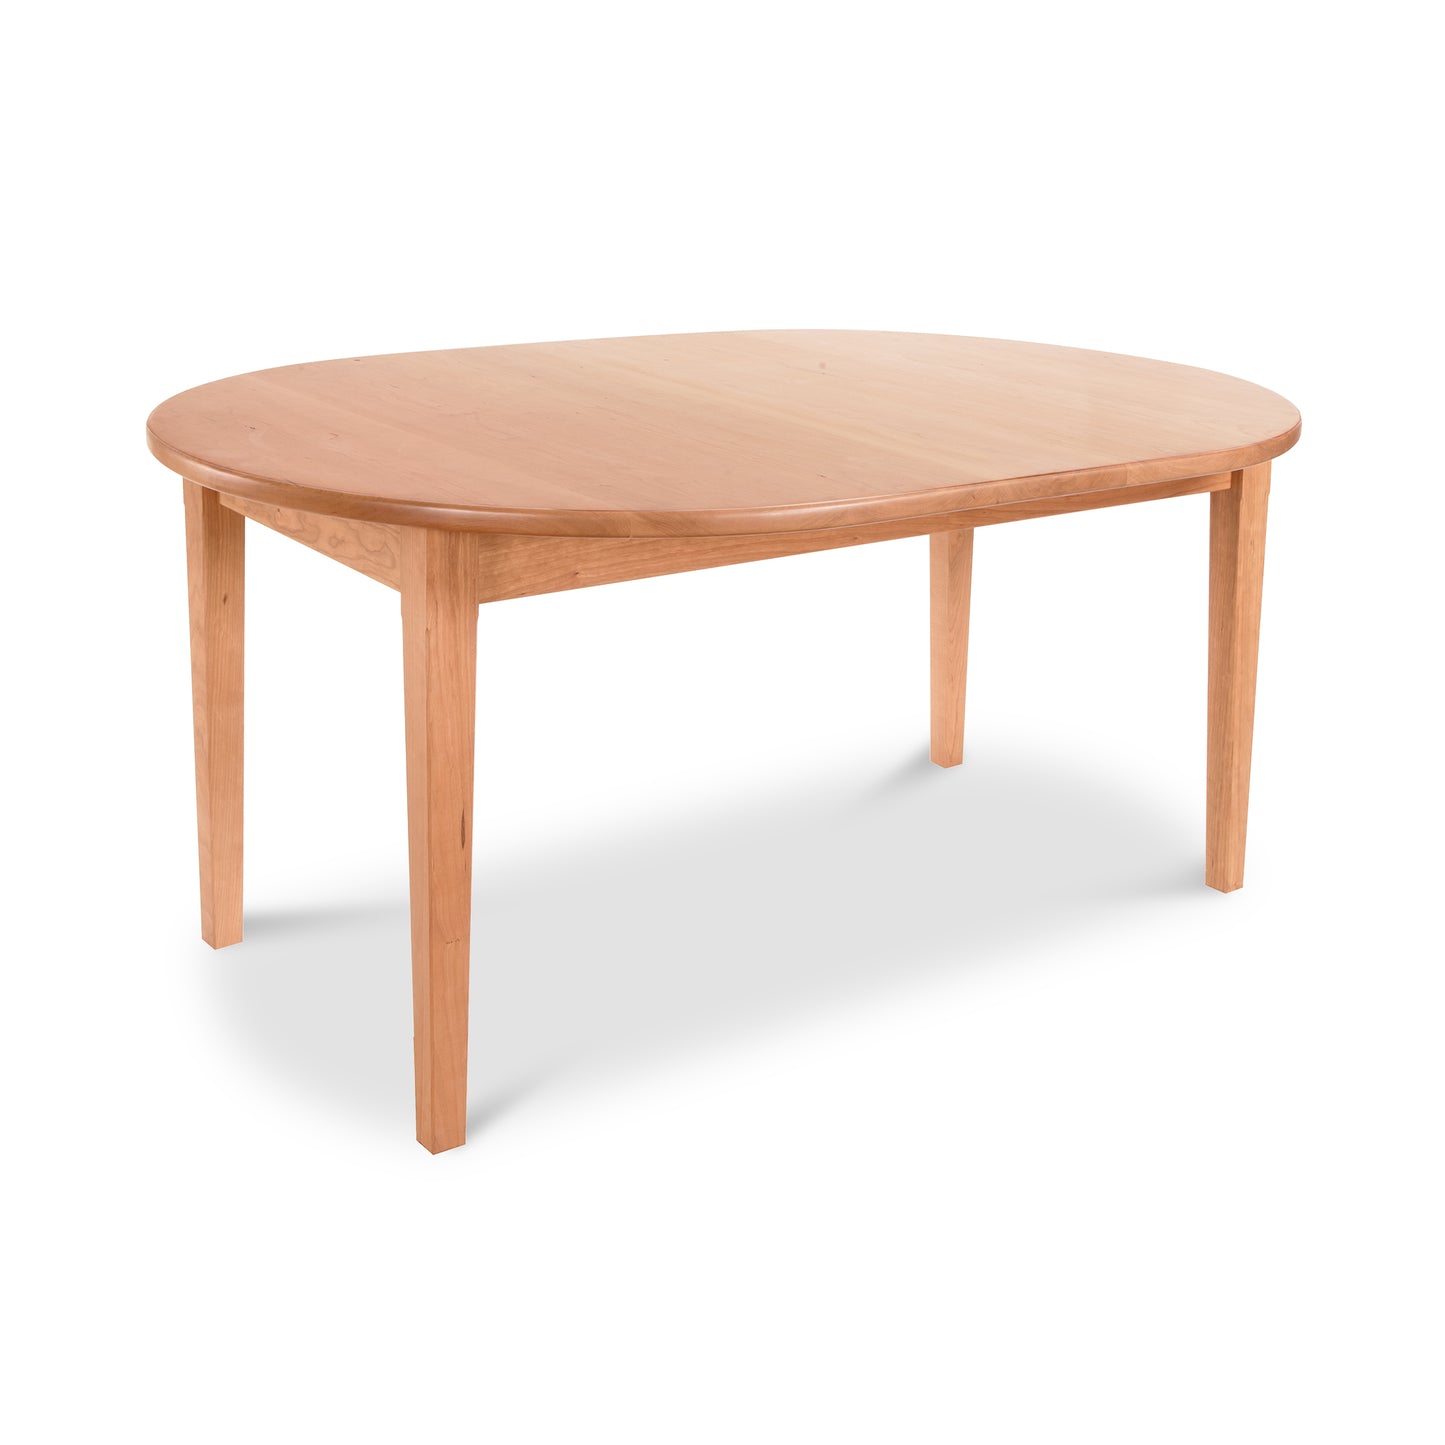 A simple Vermont Shaker Oval Solid Top Dining Table with four legs, displayed against a white background. The table's surface is smooth and light in color, highlighting its natural grain. Made by Maple Corner Woodworks.